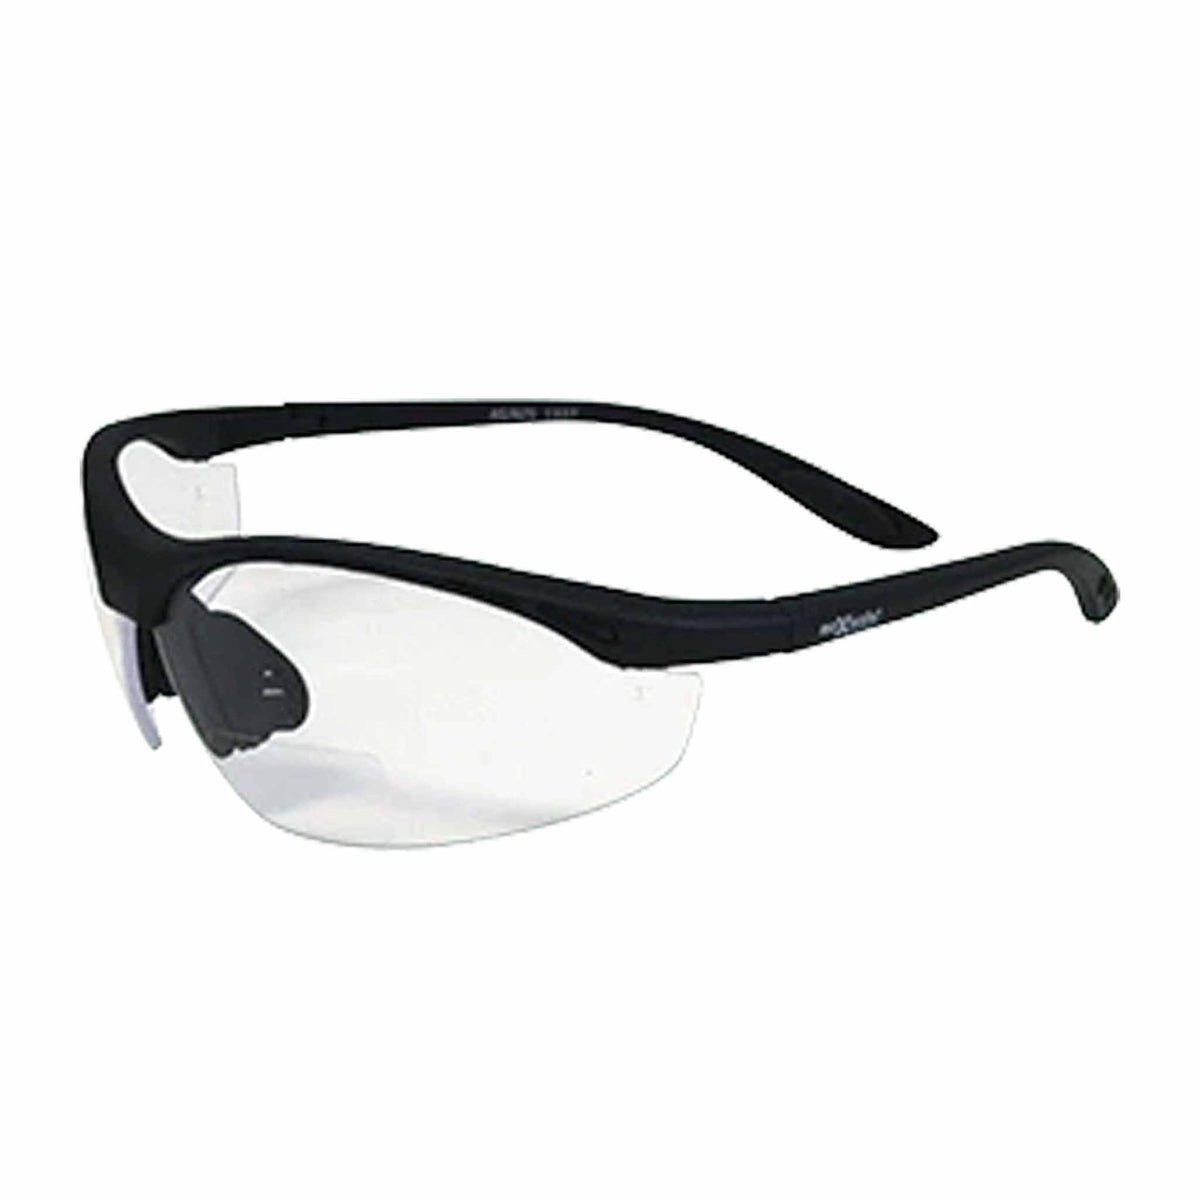 BIFOCAL SAFETY GLASSES - CLEAR - EPS466